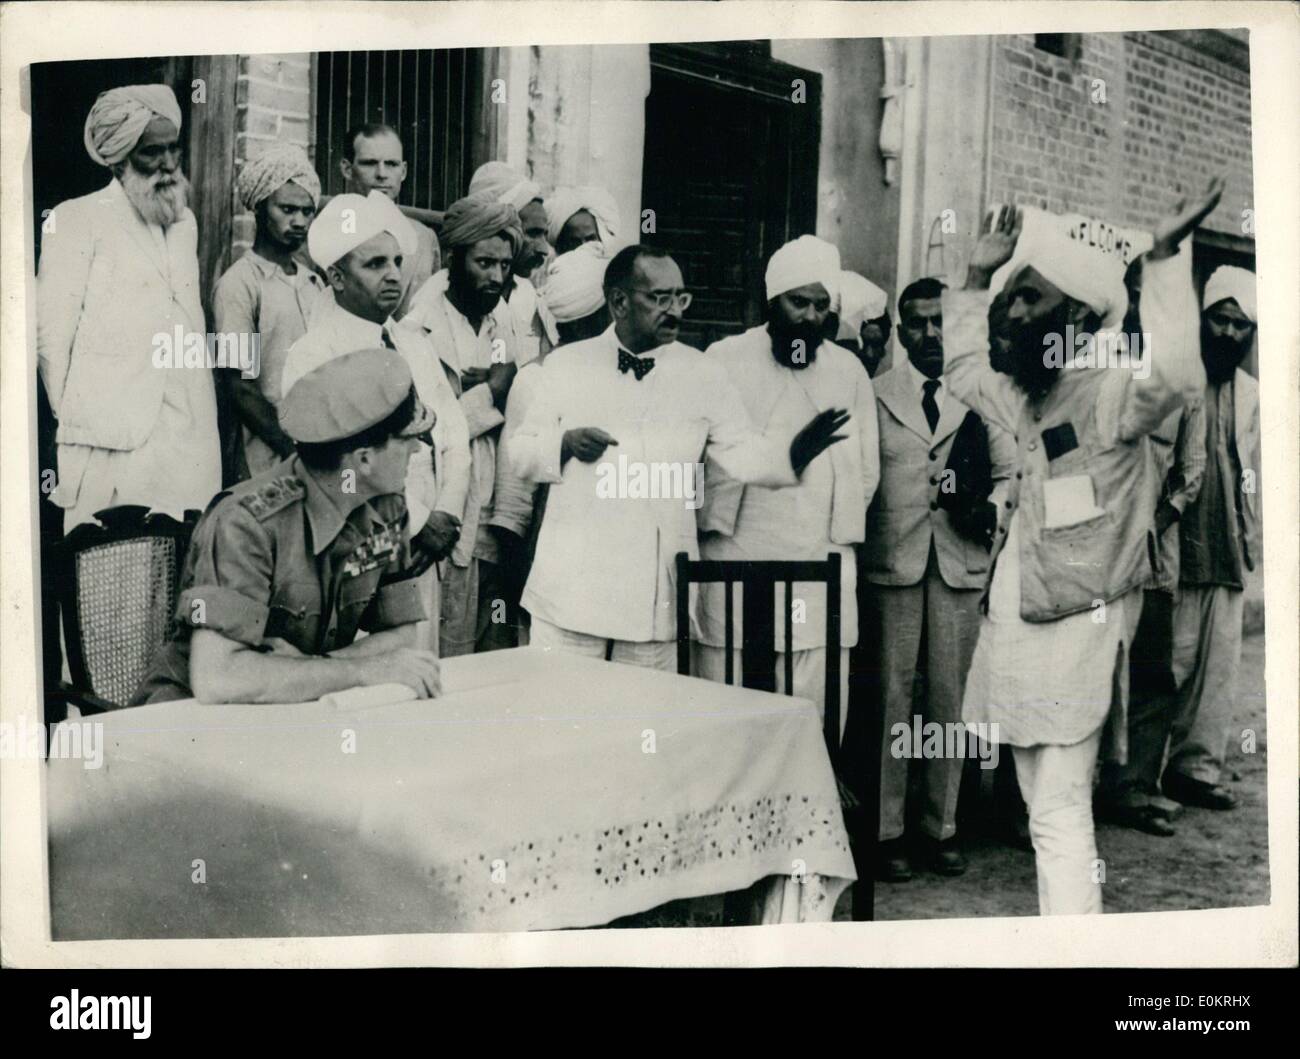 May 05, 1947 - Viceroy Visits Frontier Province. The Viceroy of India, Lord Mountbatten, recently paid a visit to the Frontier Province of India, where there has been much communal riots in recent weeks. In a crowded two-day visit, the Viceroy visited the Khyber Pass, saw villages which had been wrecked in rioting in the Rawalpindi district, and addressed a tribal jirga at Landi Kotal. Keystone Photo Shows:- A gesticulating inhabitant of Kabuta, a town in the Rawalpindi district which suffered damage during the disturbances, tells the Viceroy of happenings during the trouble. Stock Photo